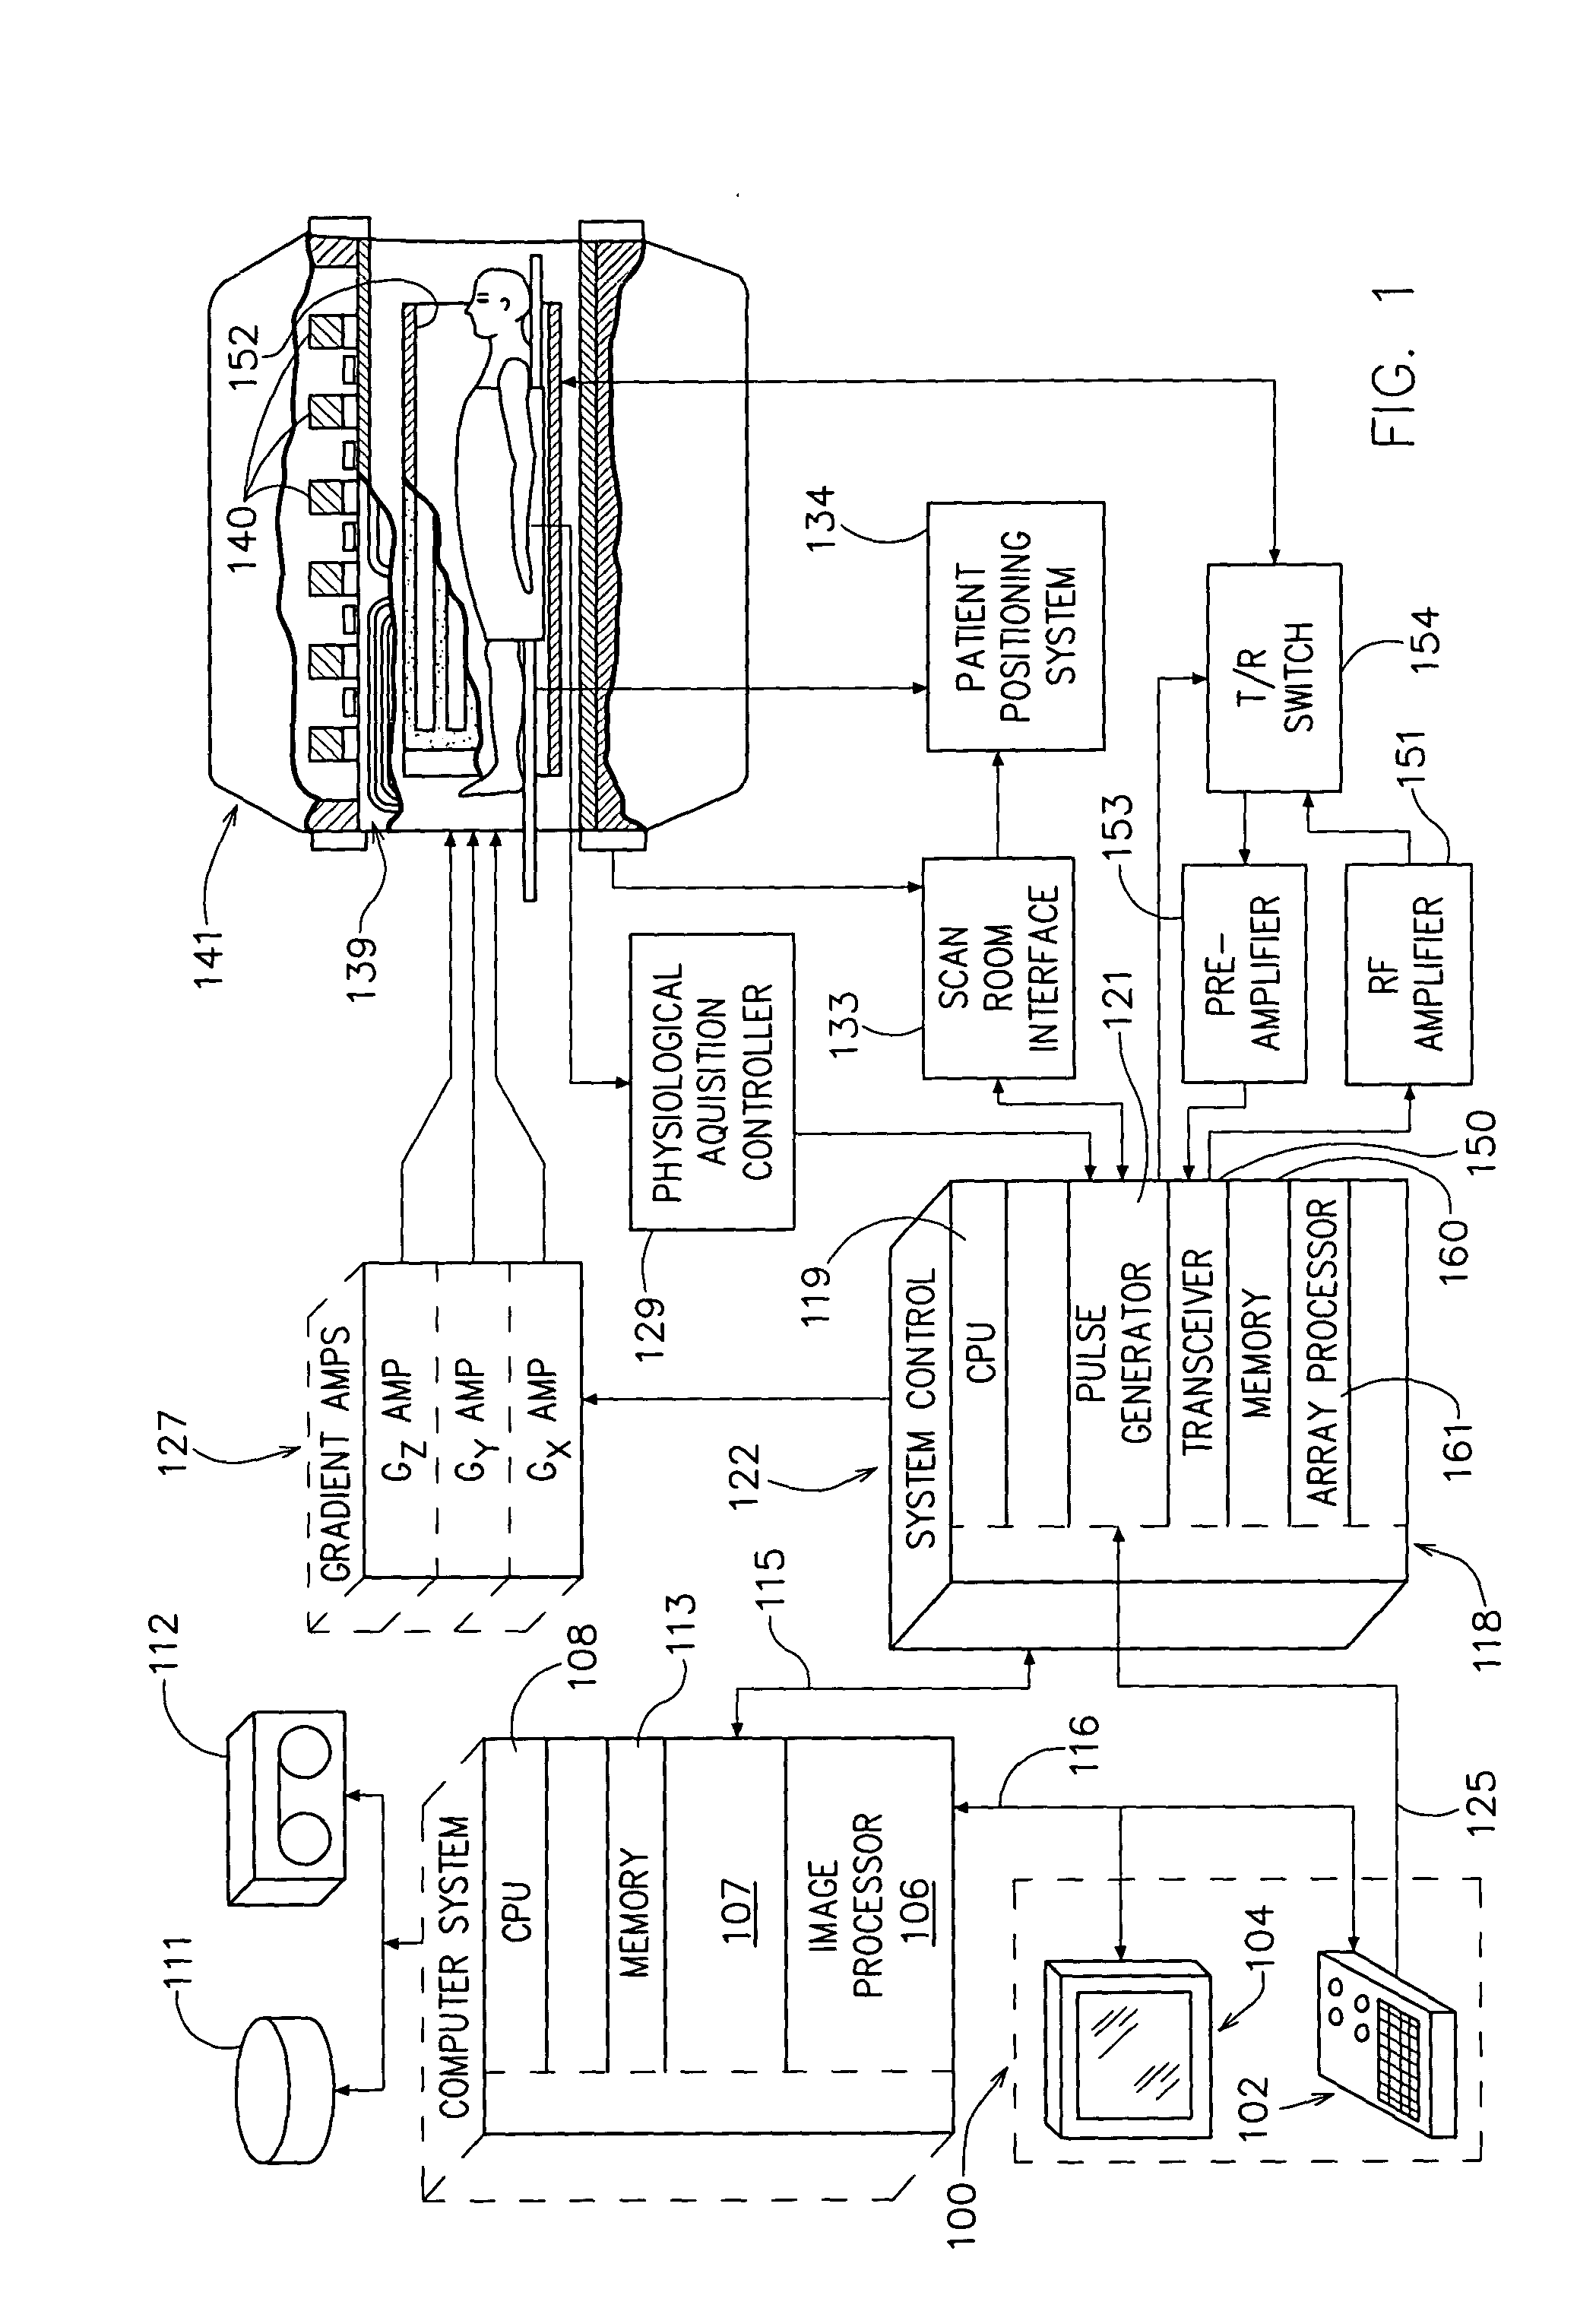 Method for three plane interleaved acquisition for three dimensional temperature monitoring with MRI